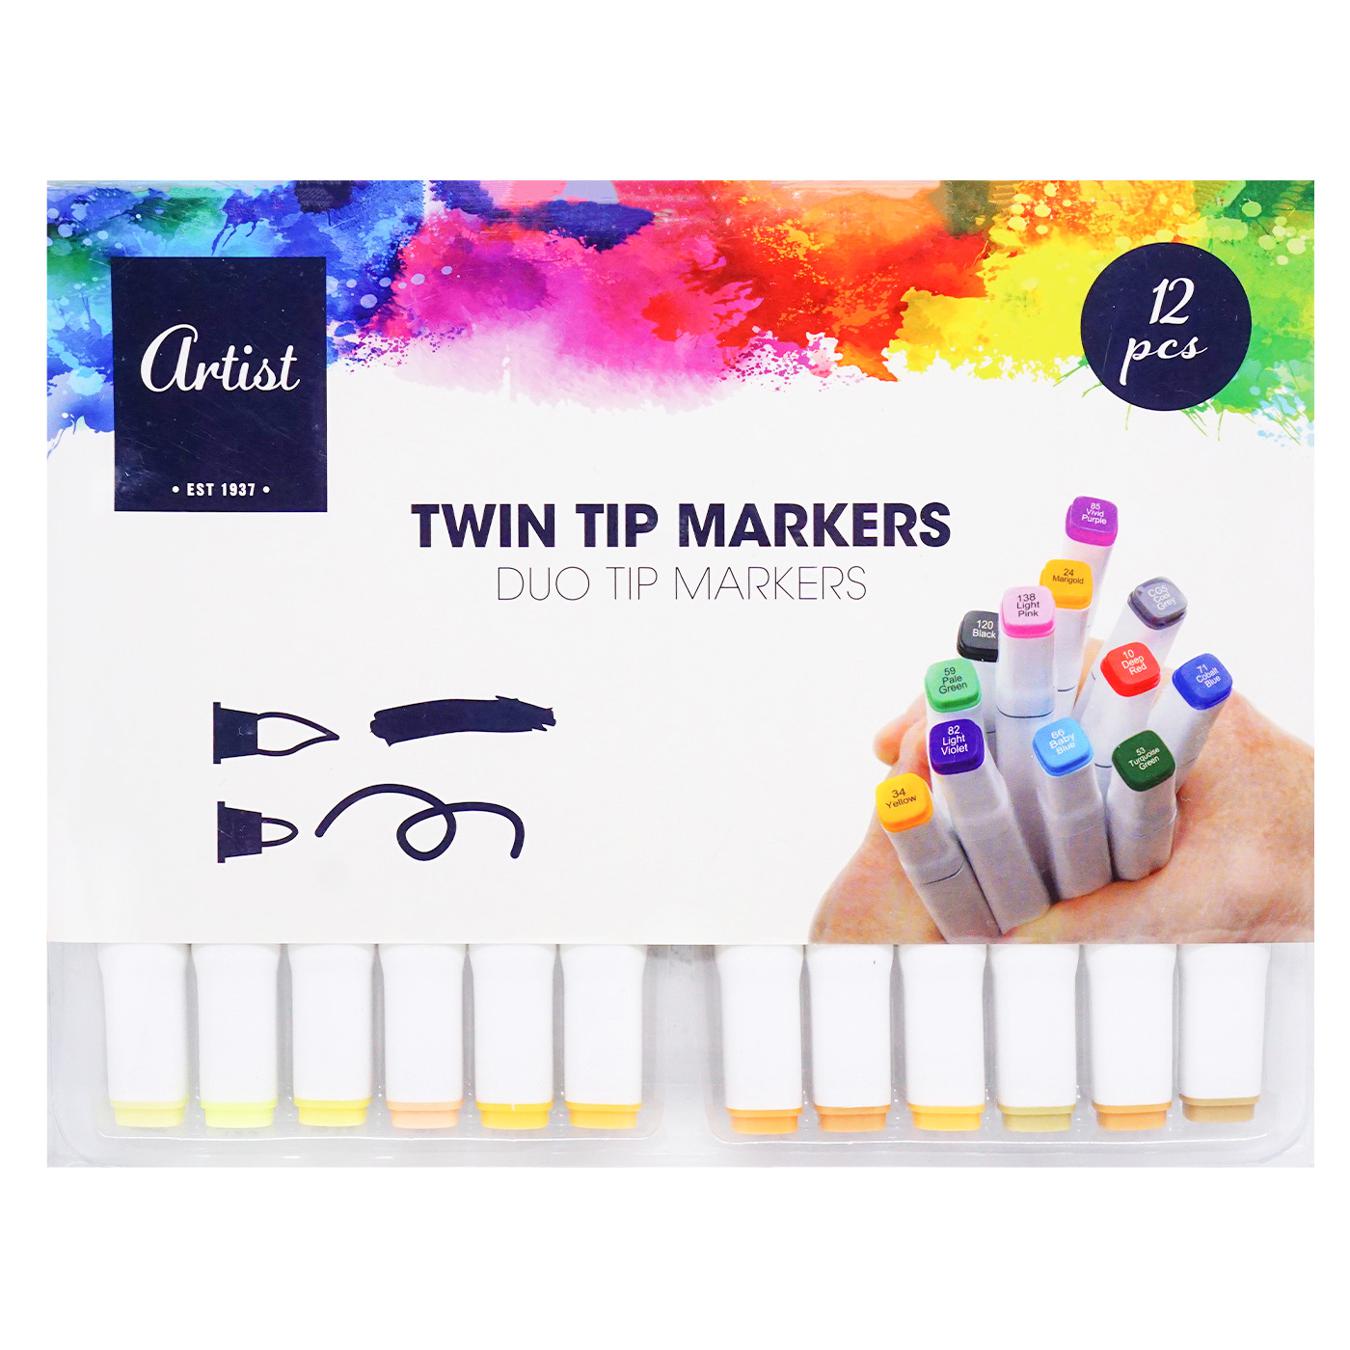 Koopman Duo markers for drawing 12 pcs